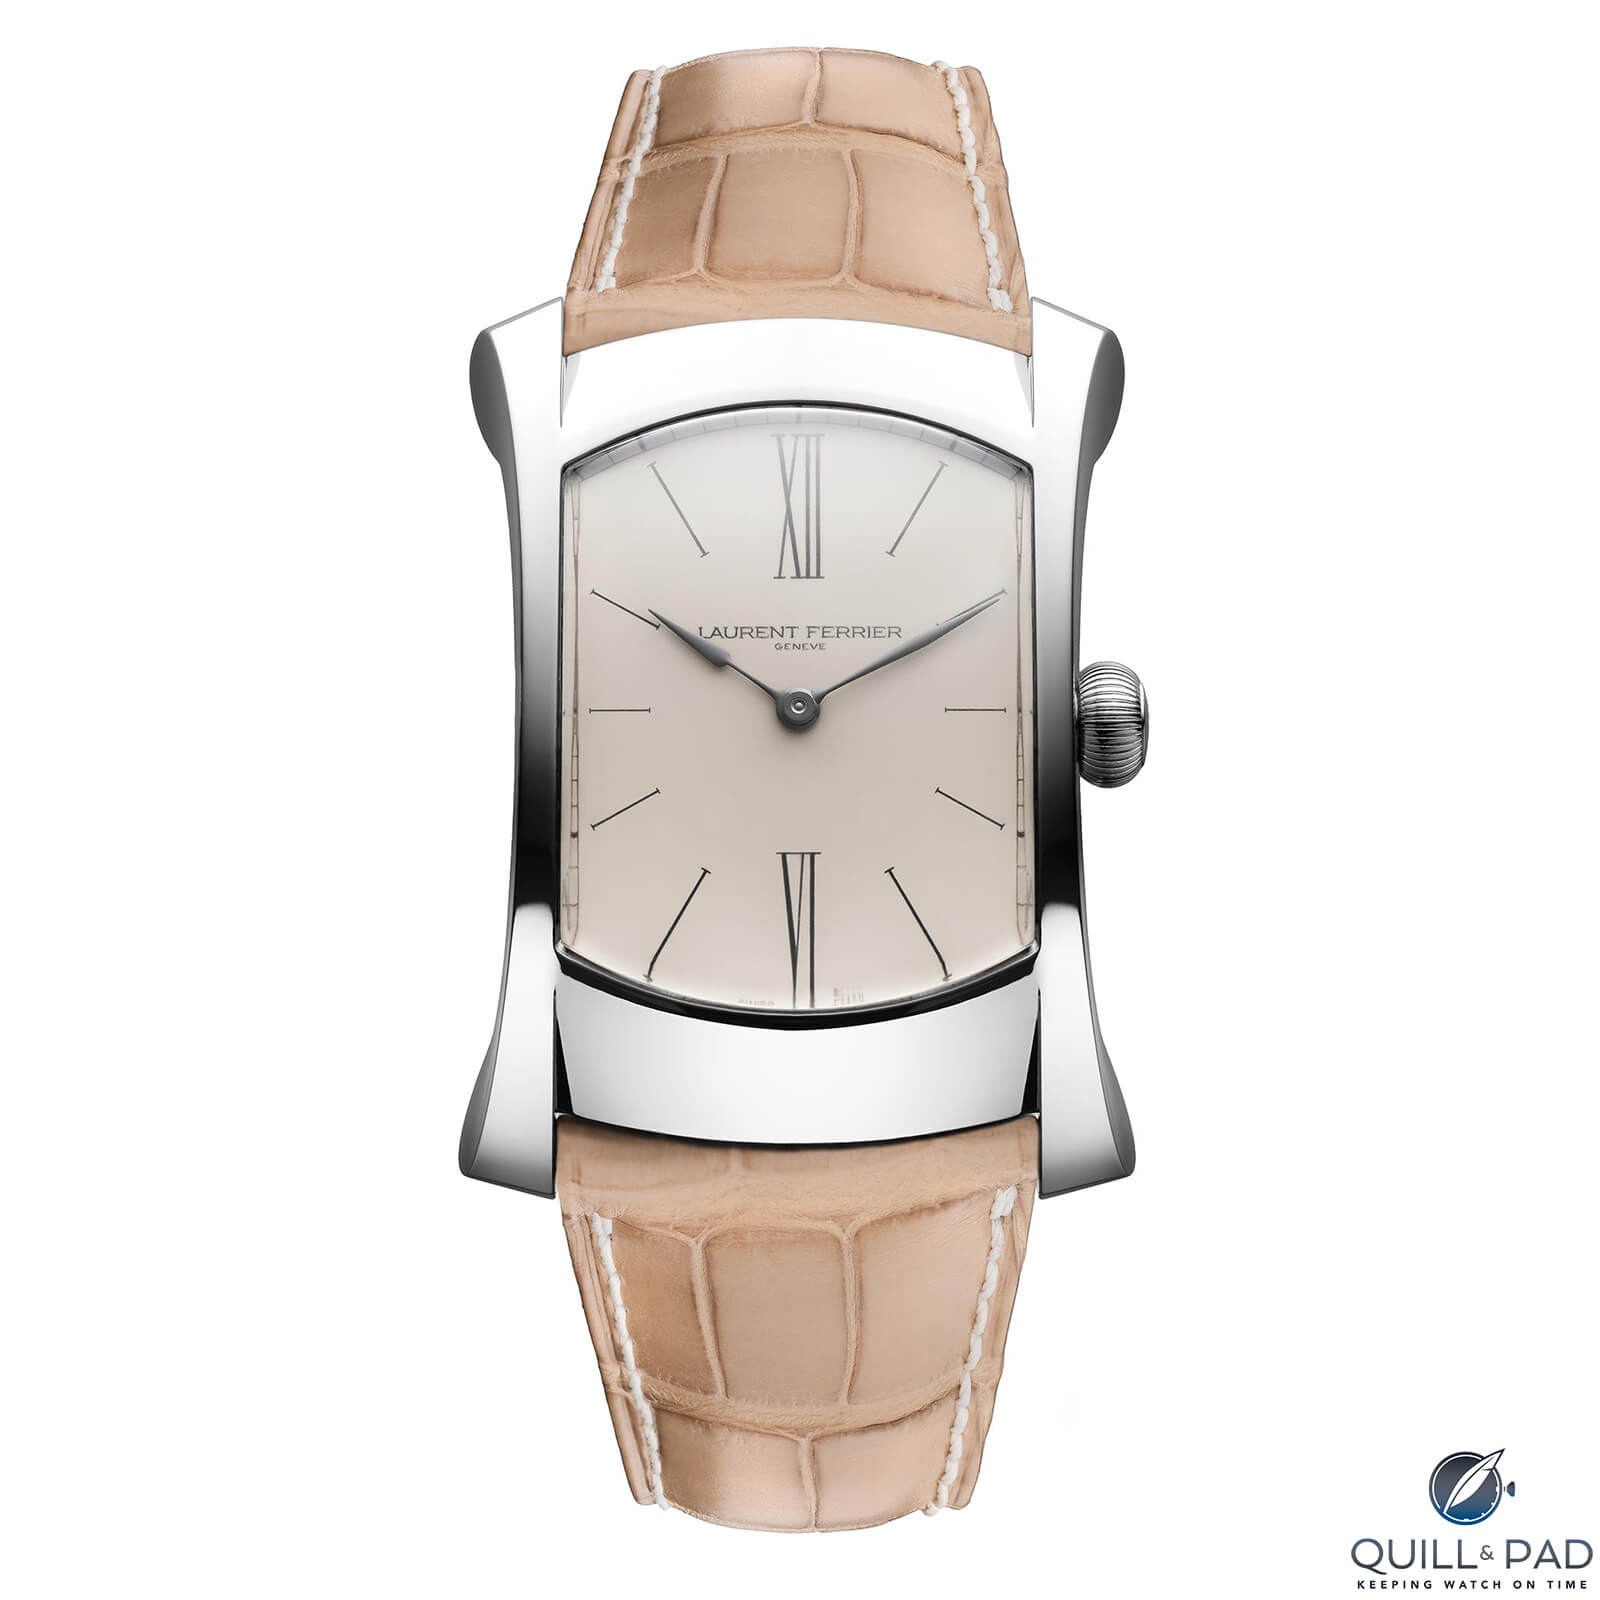 Laurent Ferrier Bridge One with white dial